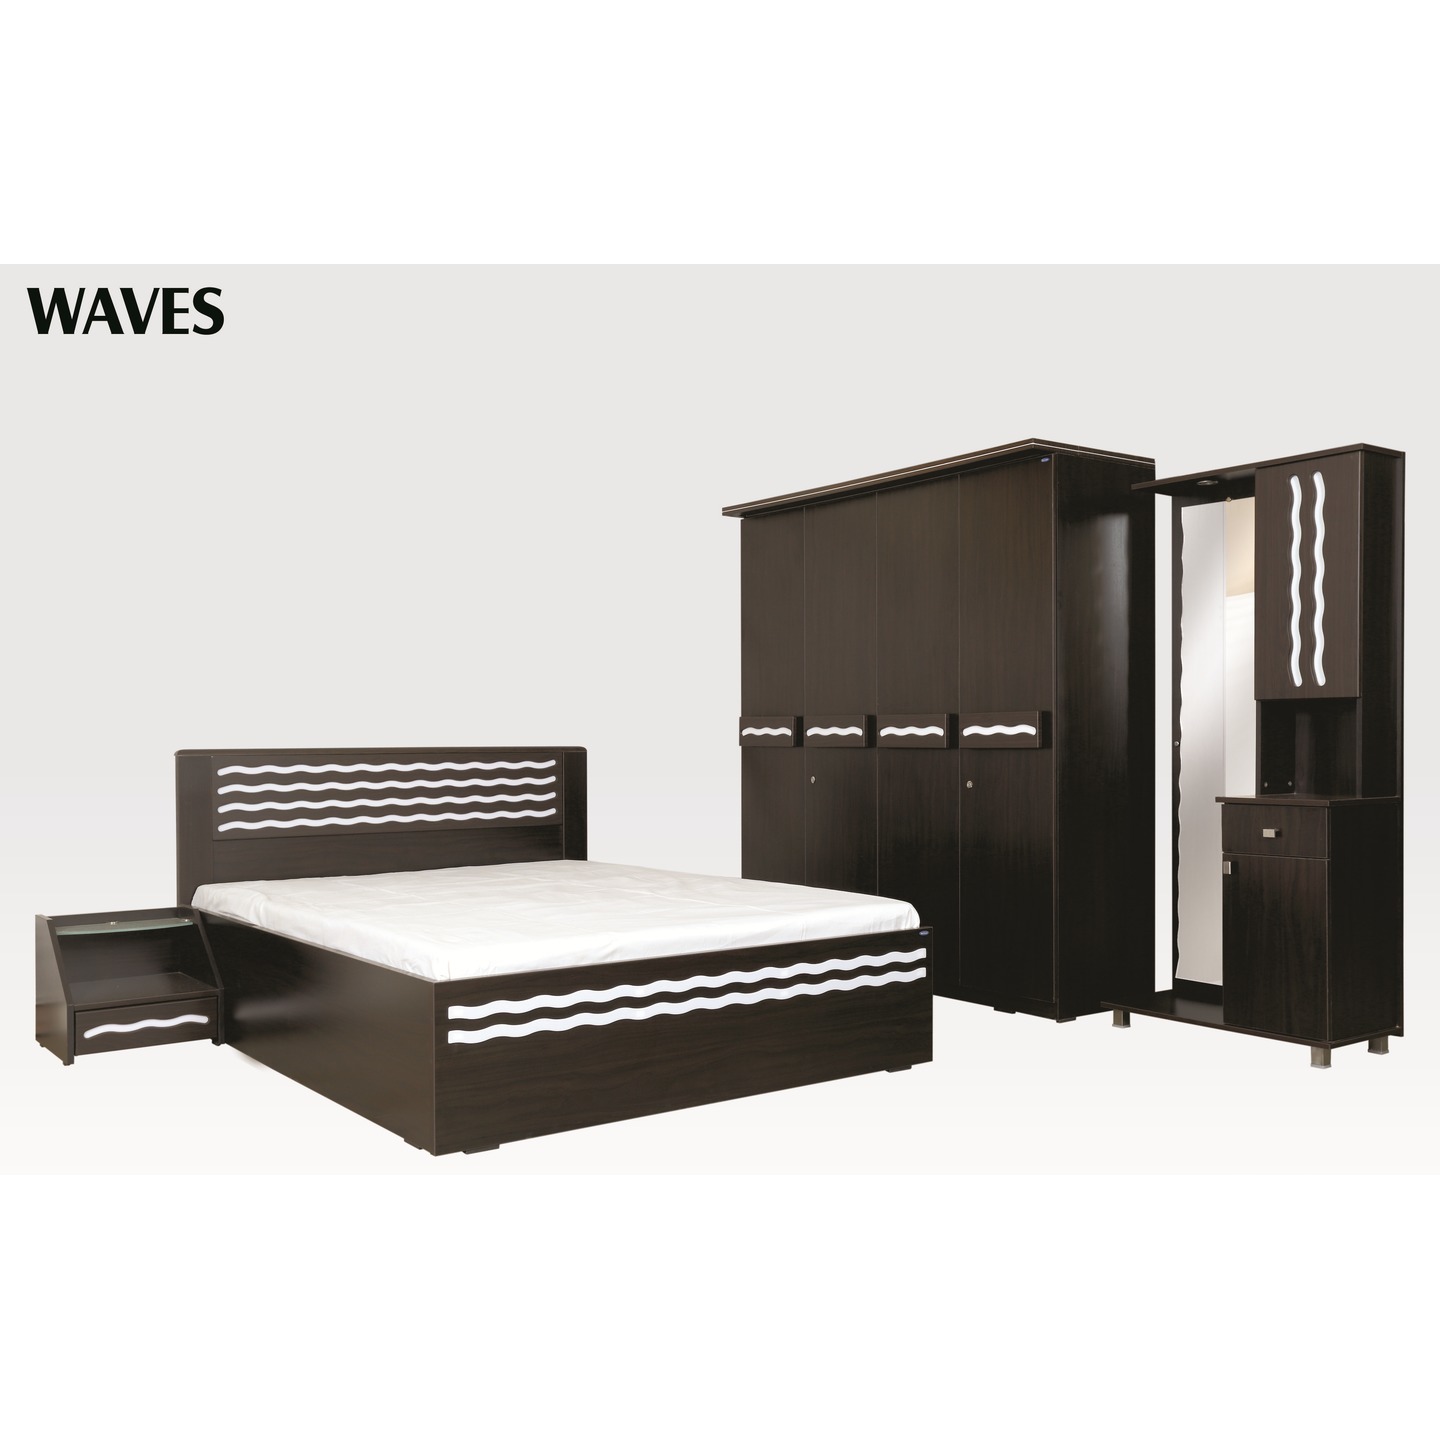 RD Queen Size Bed Hydraulic 78"x60" Waves In Dark Brown Colour